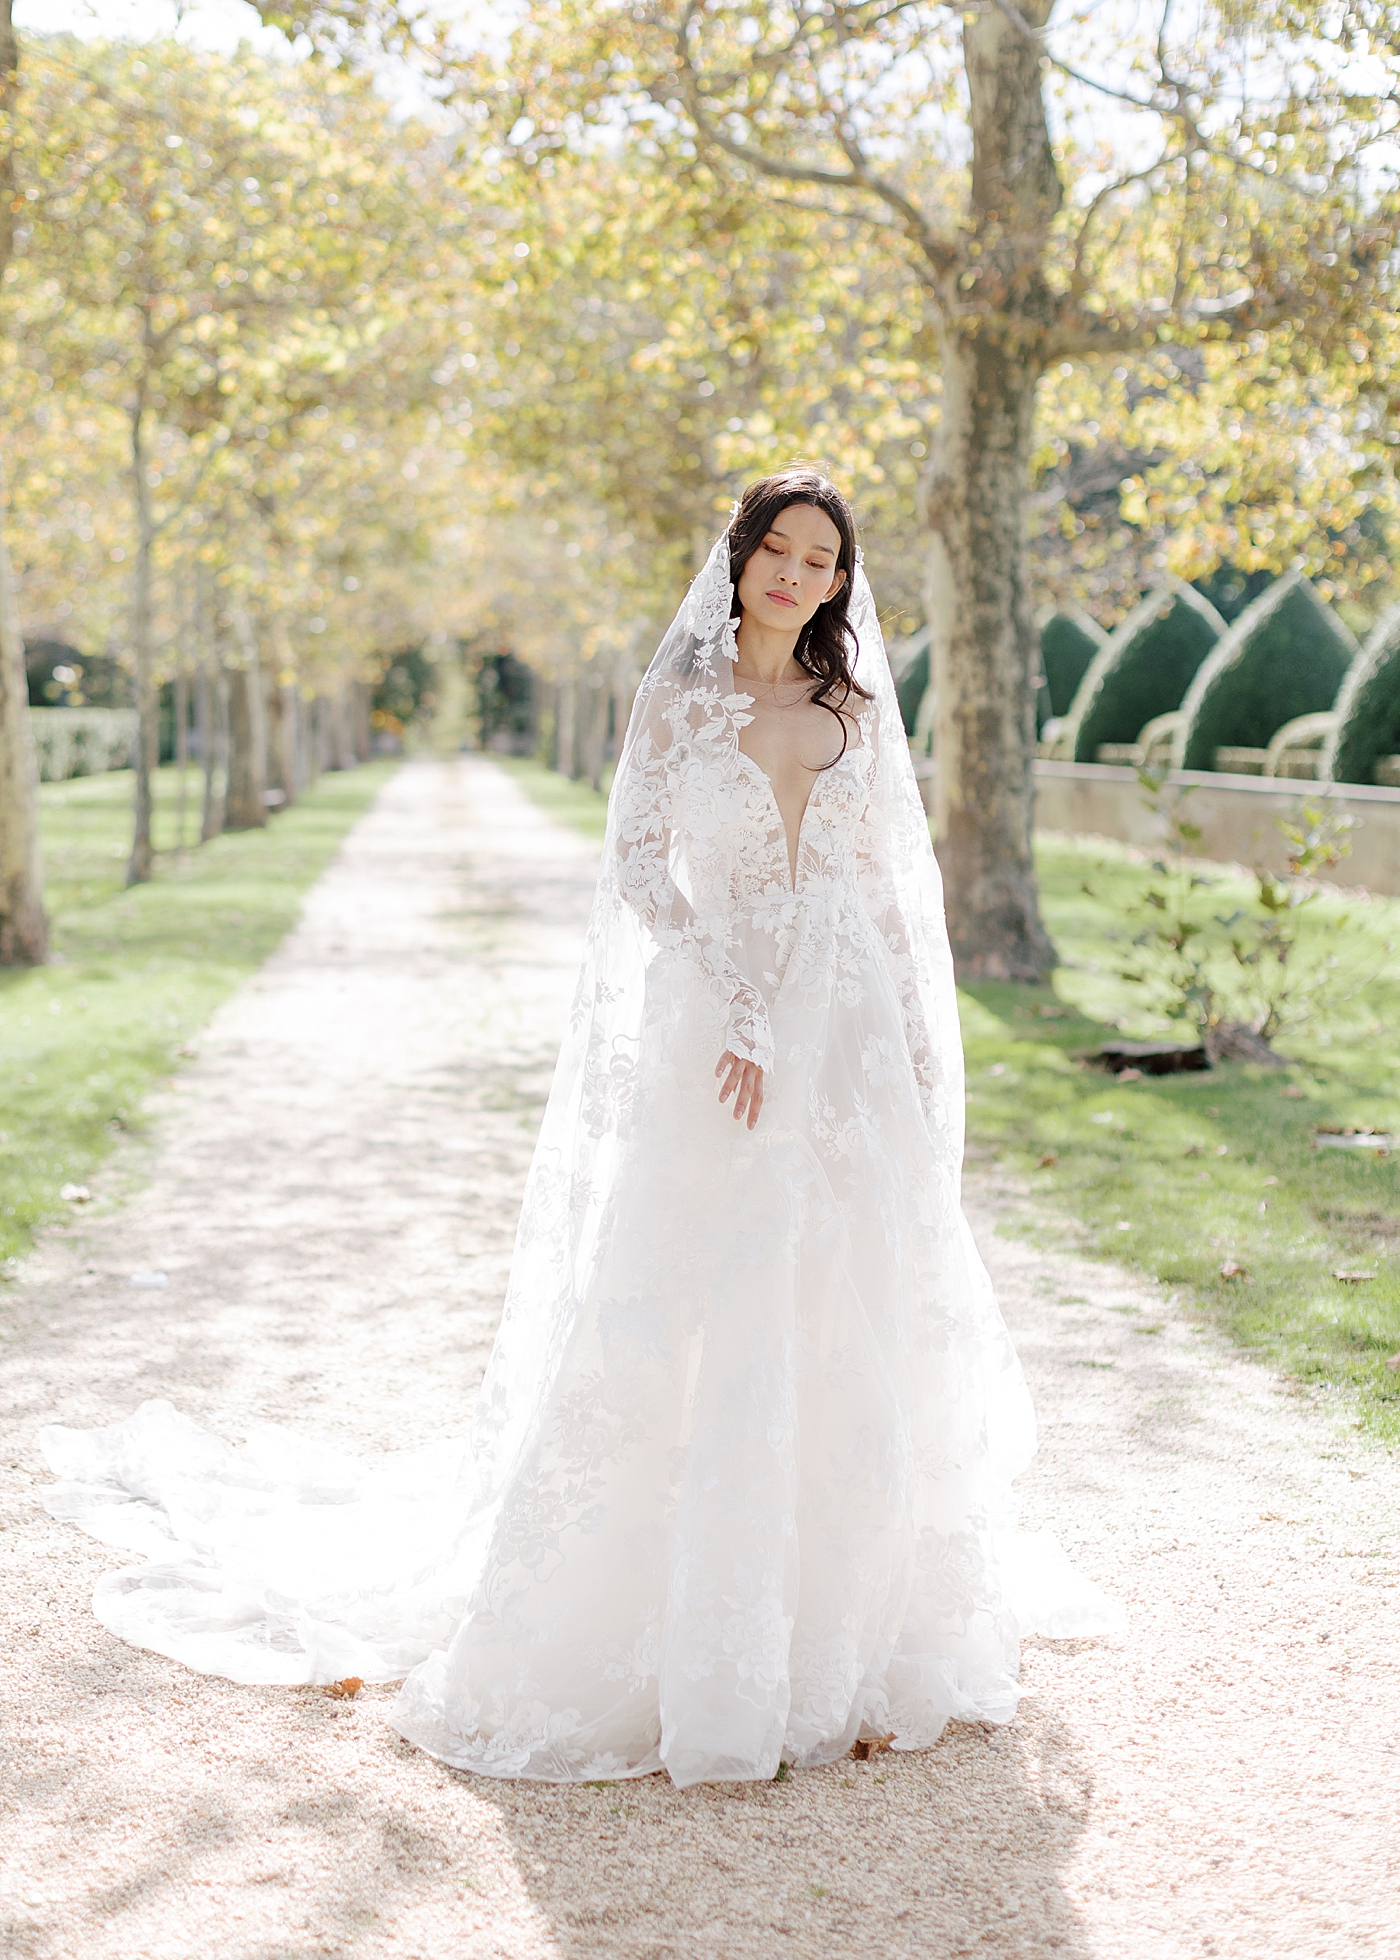 Bridal portrait at the end of a tree-lined driveway during Oheka castle wedding | Image by Hope Helmuth Photography